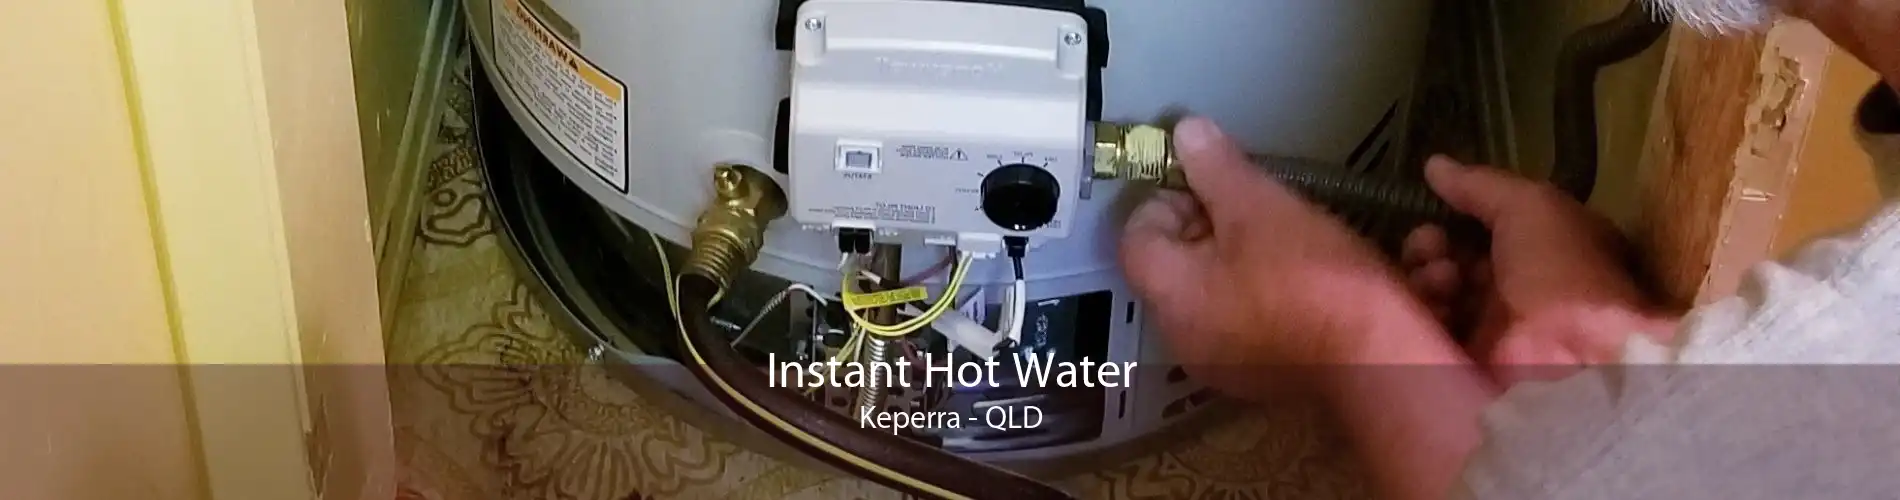 Instant Hot Water Keperra - QLD